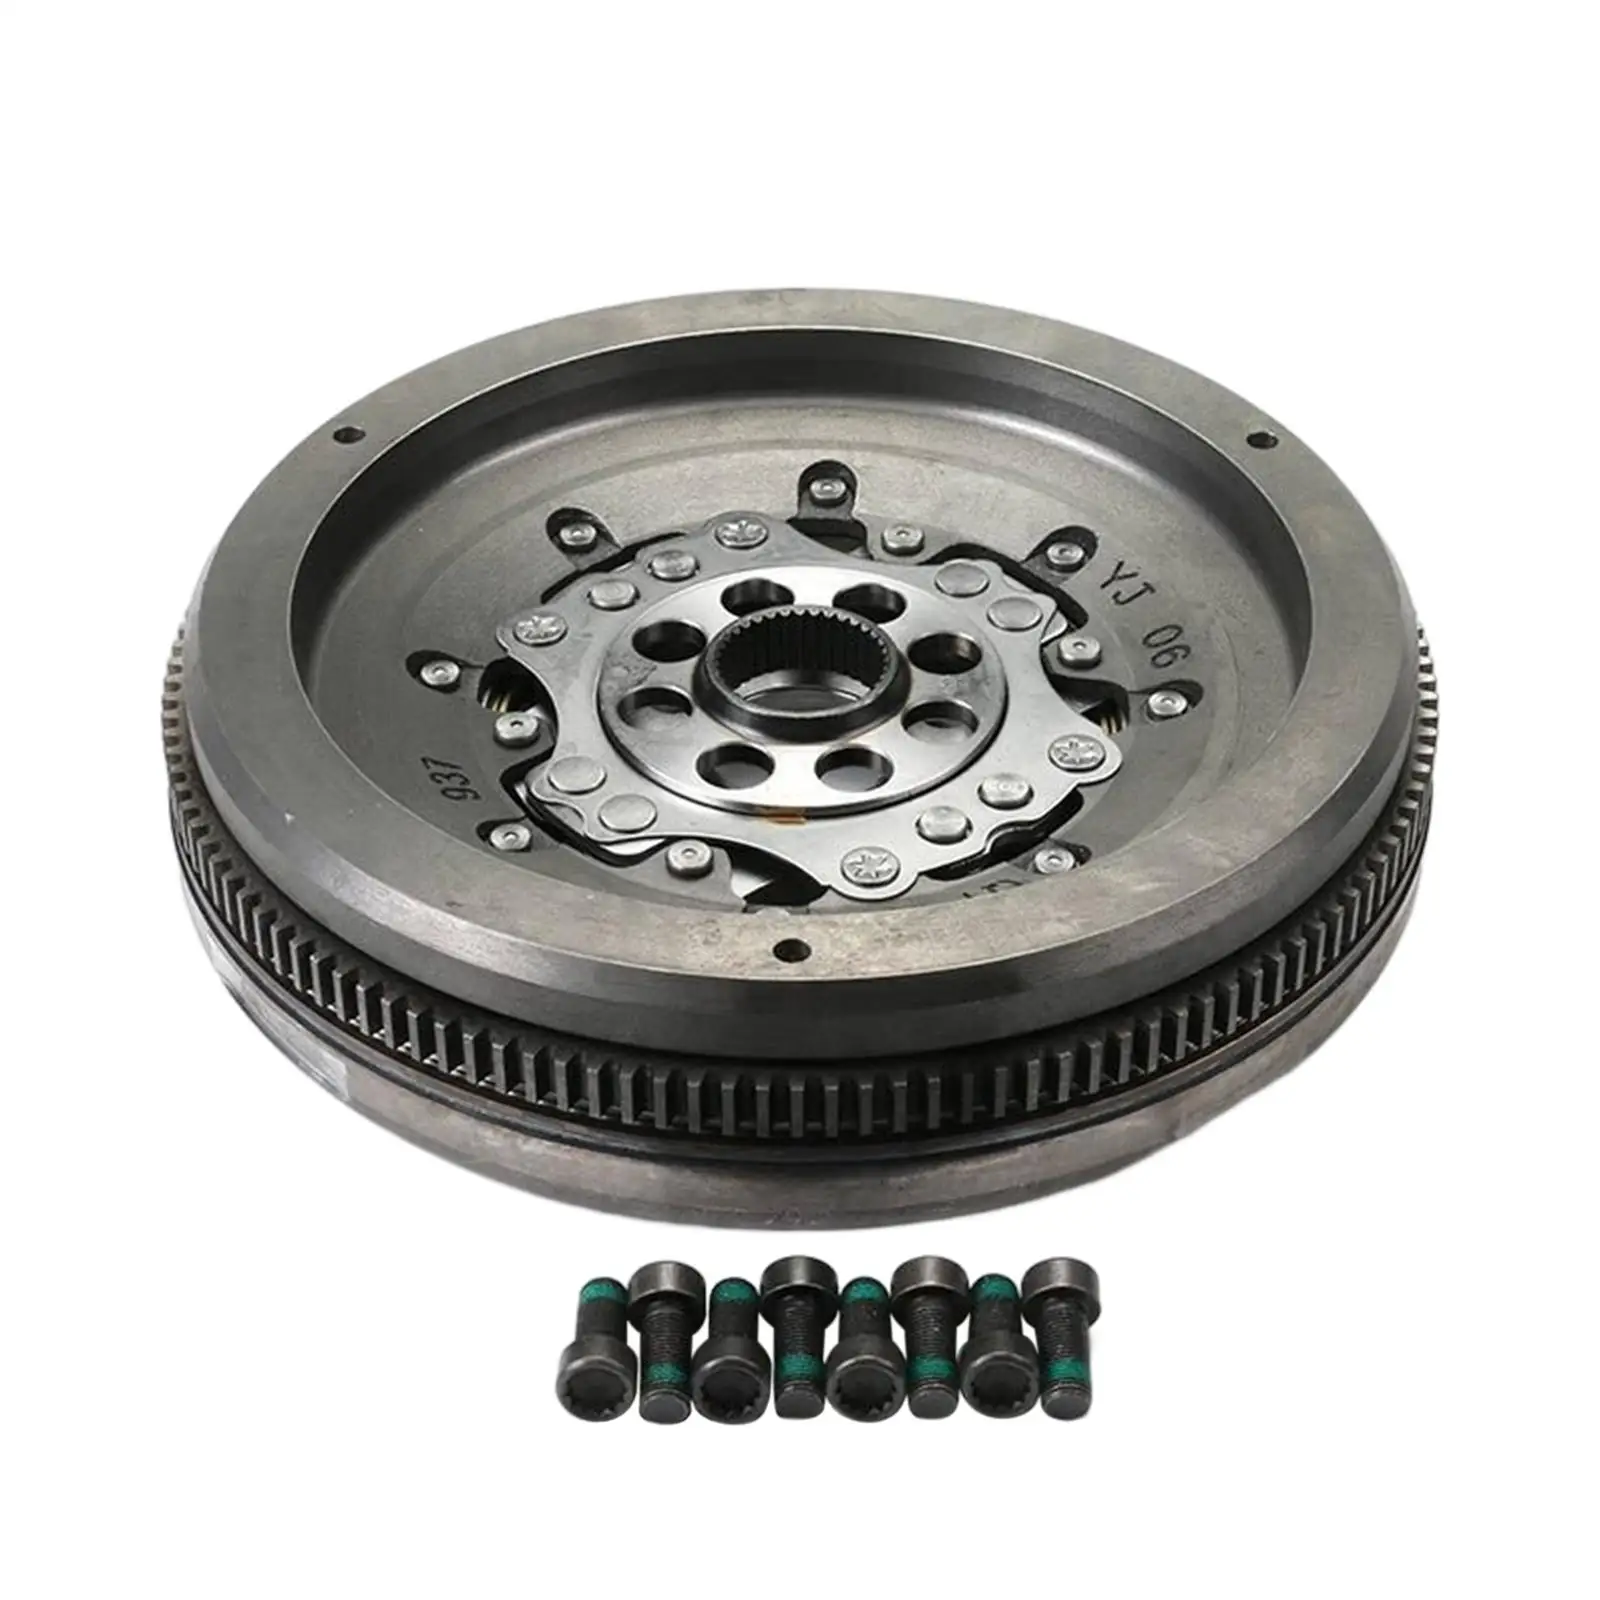 Vehicle Transmission Flywheel 02E Dq250 for Audi Accessories Durable